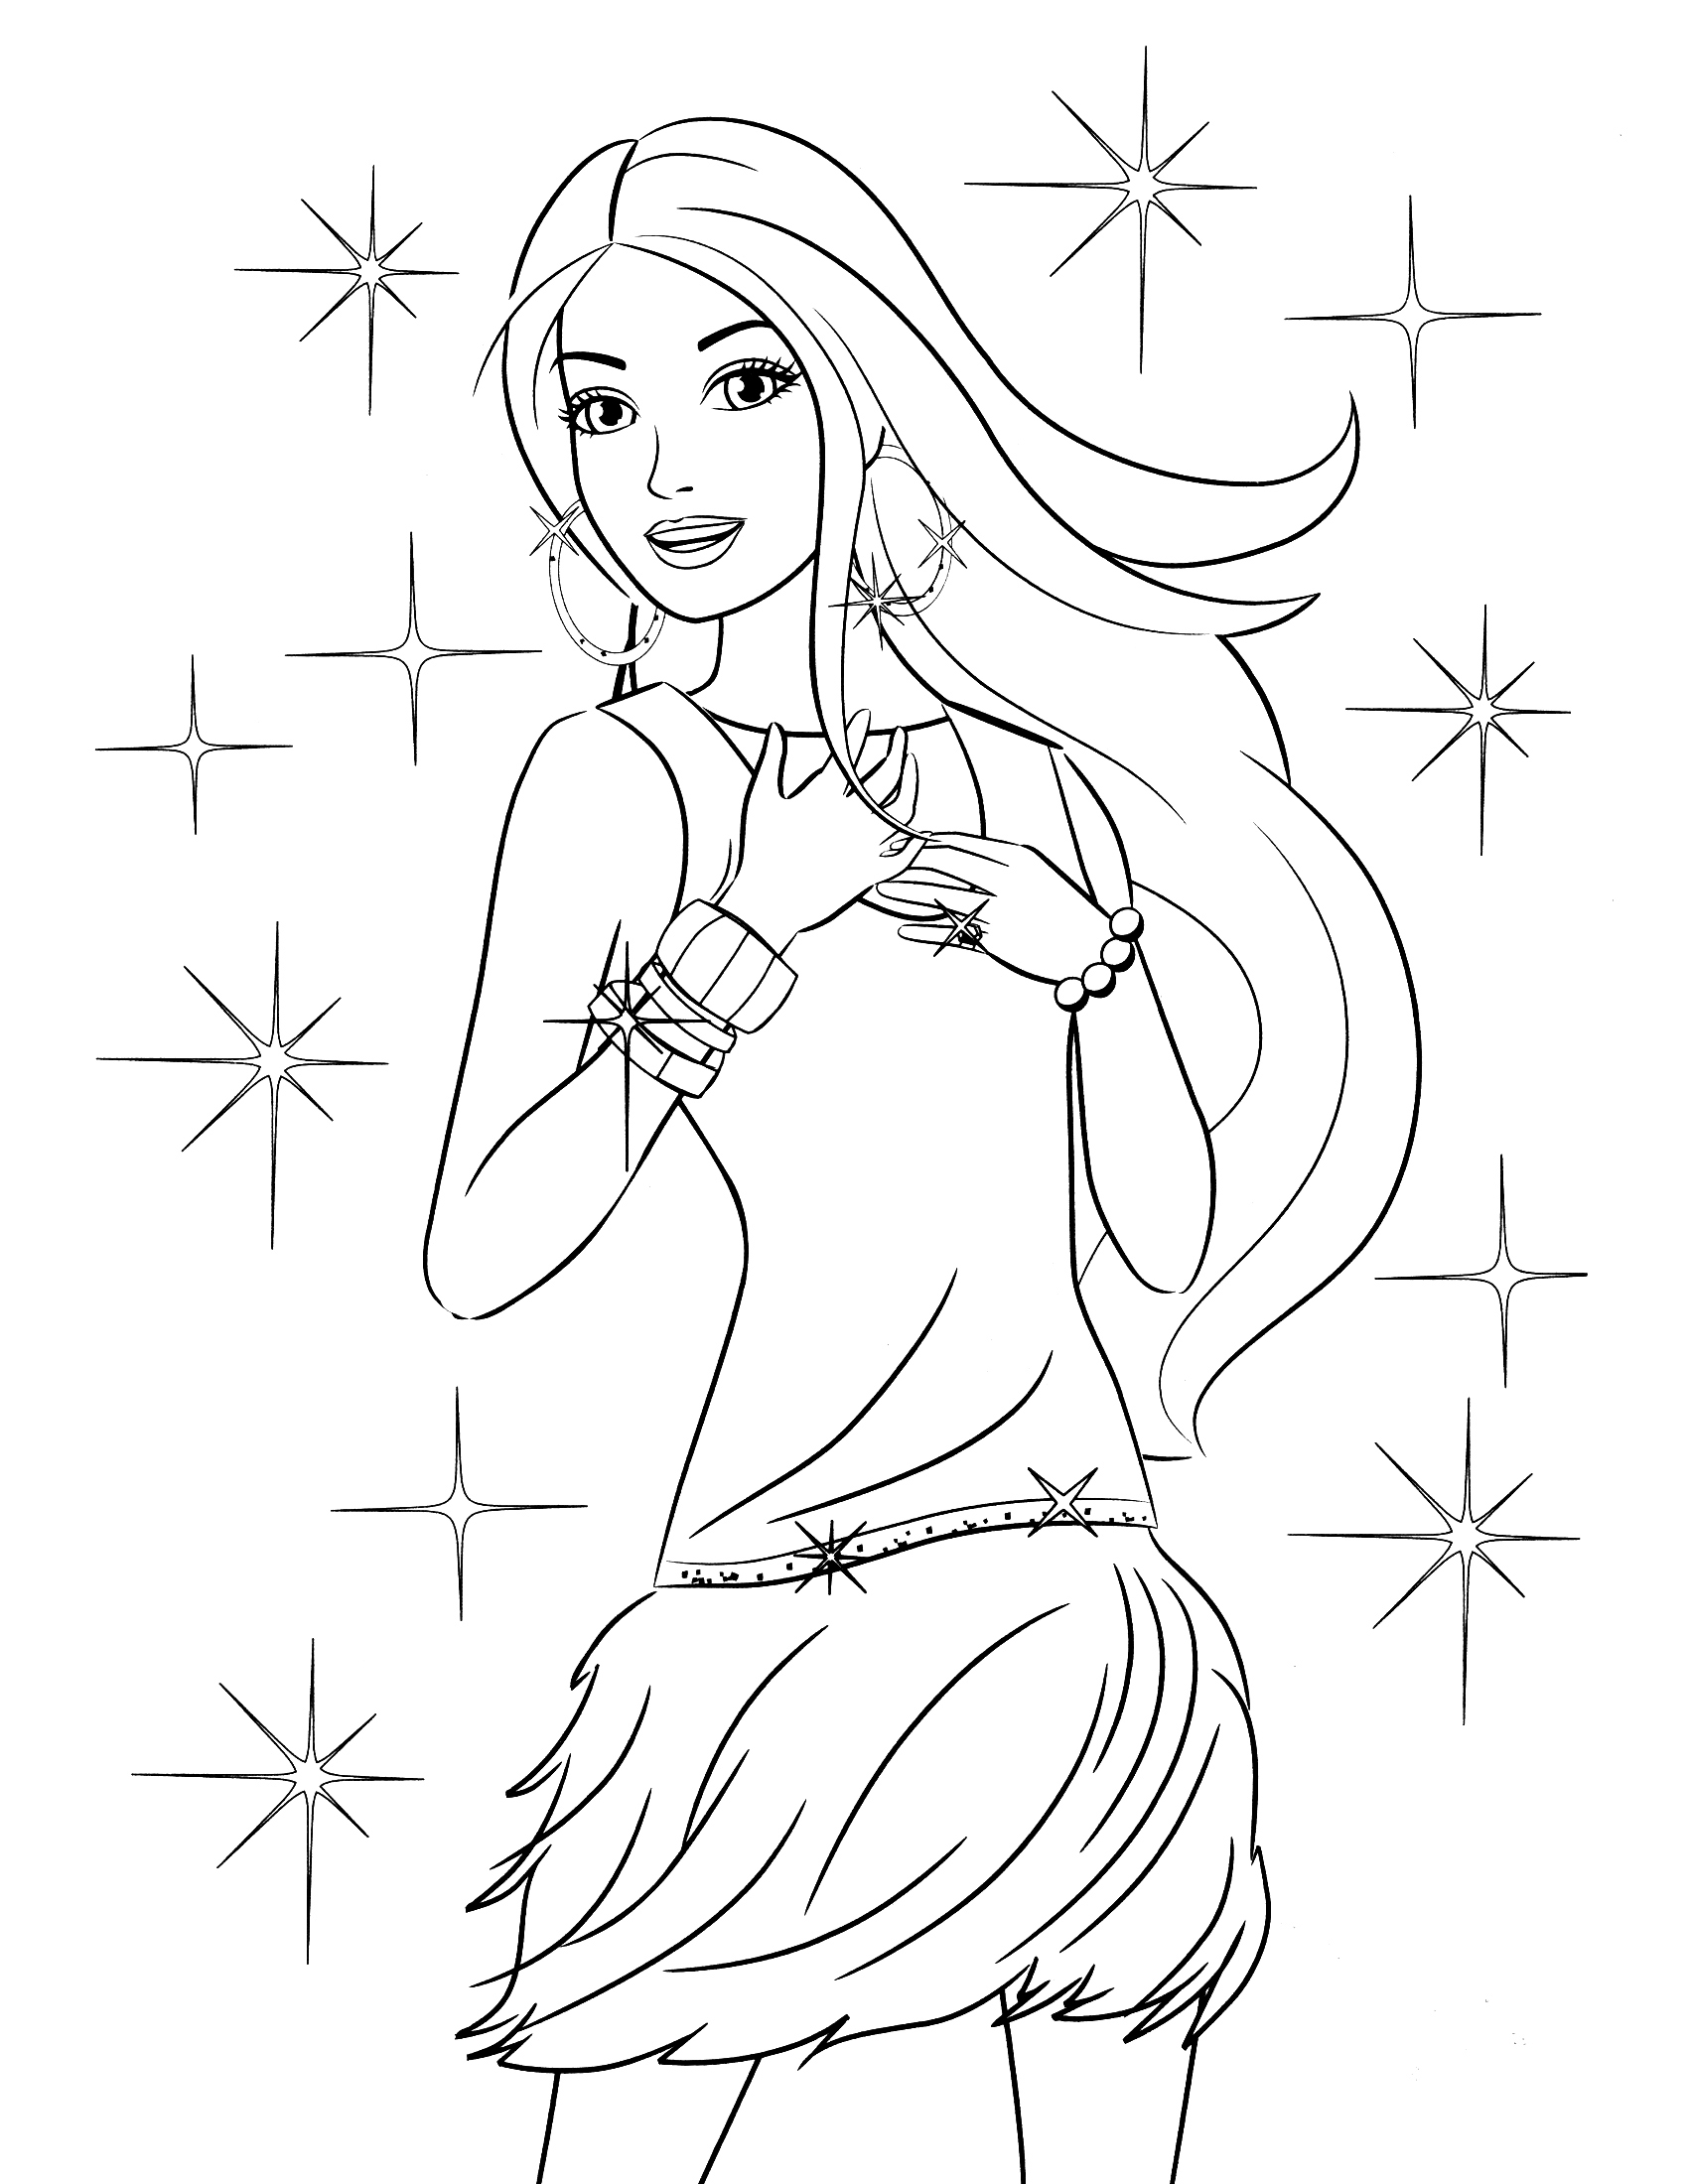 Barbie And Friends Coloring Pages At GetColorings Free Printable Colorings Pages To Print